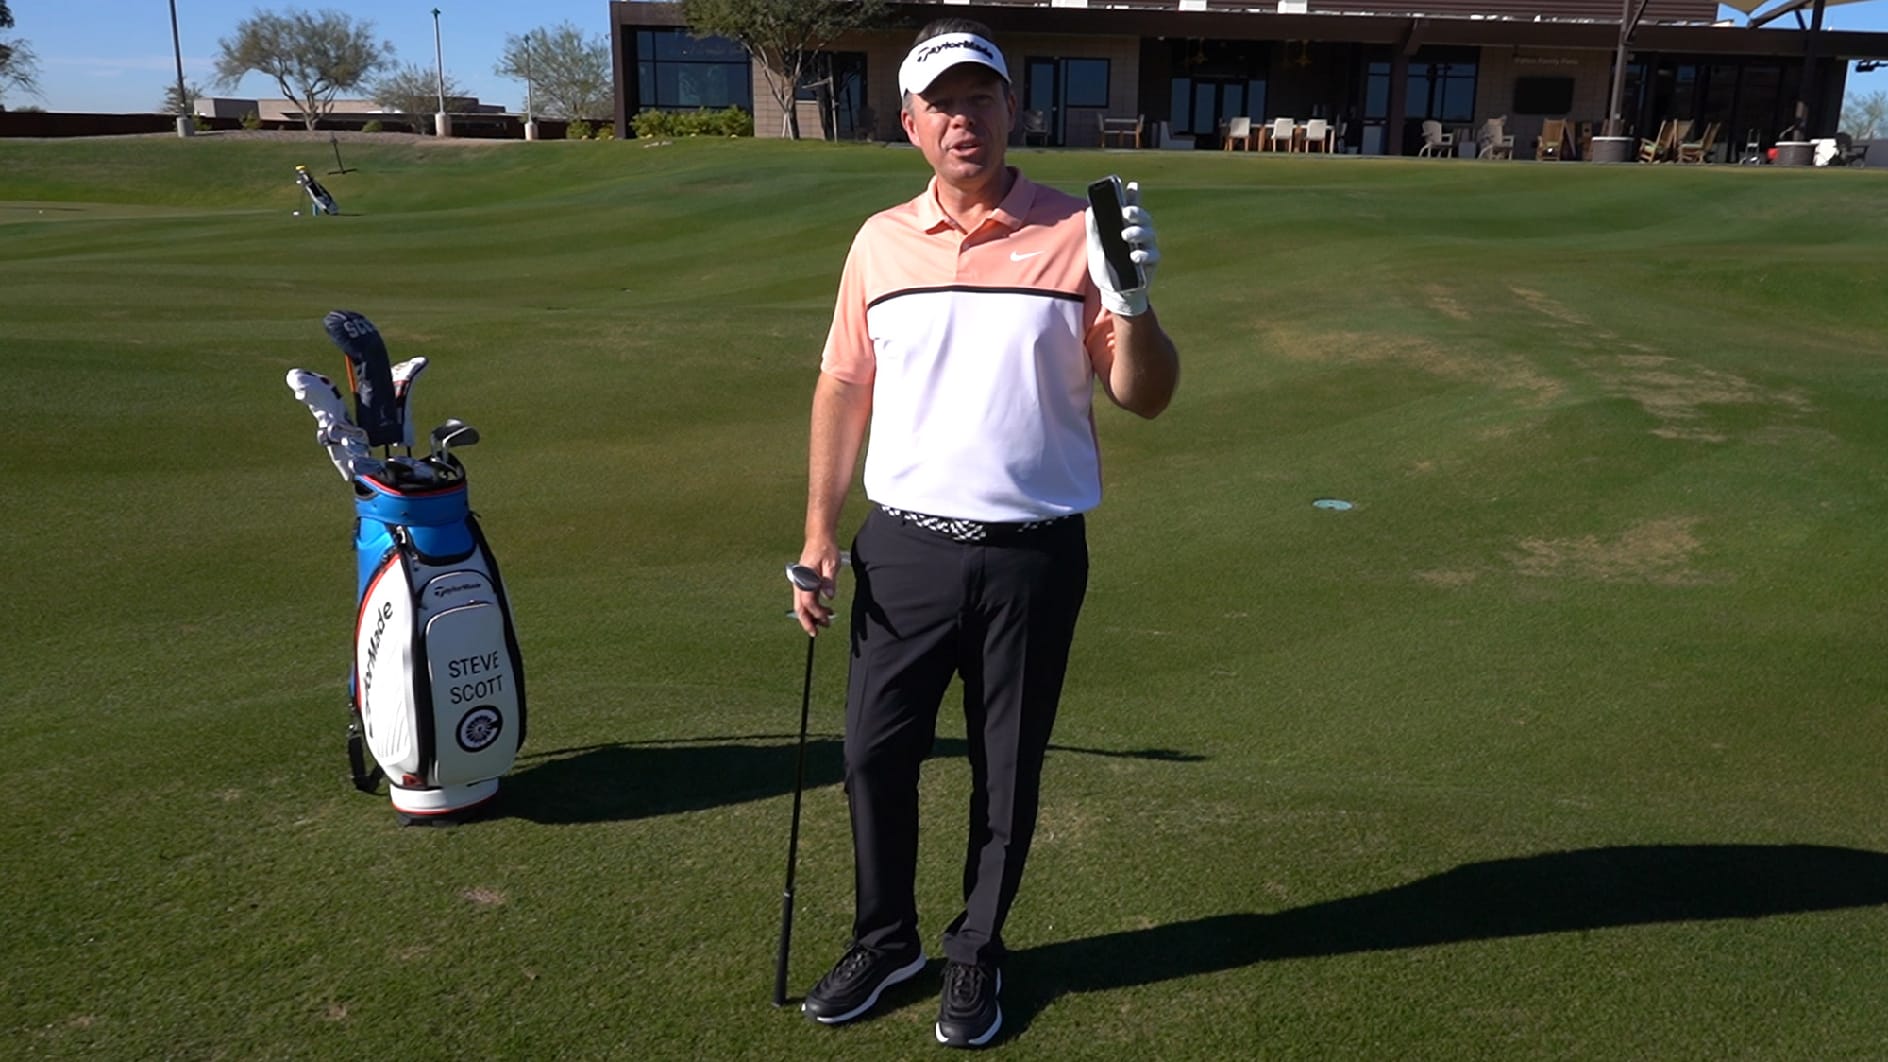 Golf Instruction with Steve Scott: Pitching the selfie